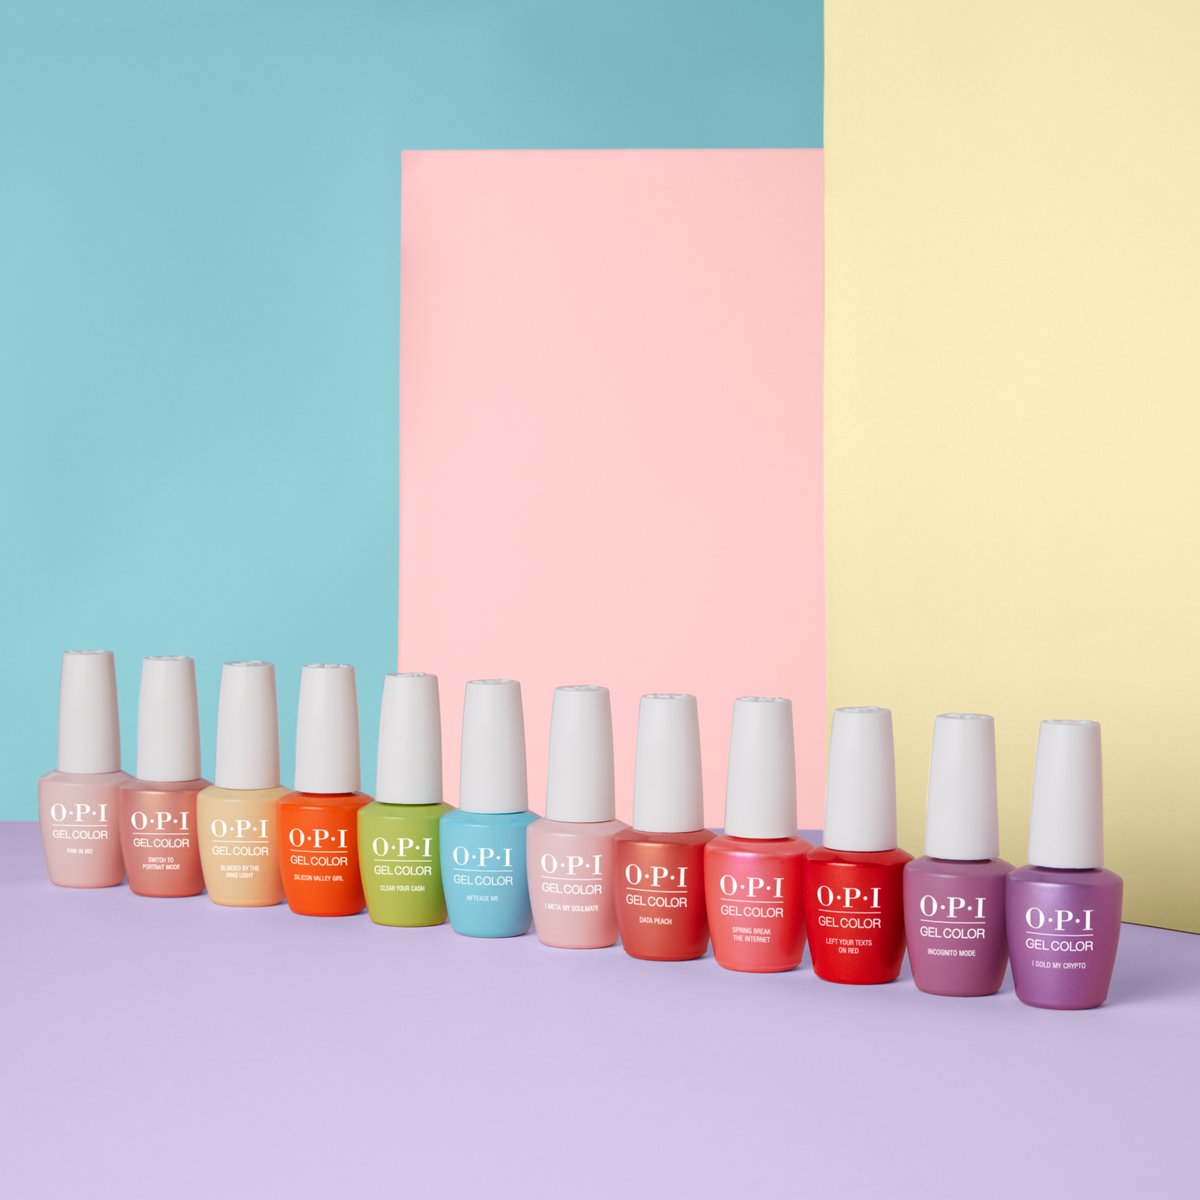 🆕“Me, Myself, And OPI Collection” expresa Colores brillantes y pasteles. 💐💟
#MeMyselfAndOPI Disponible en OPI Nail Lacquer, Infinite Shine, Gel Color y OPI Powder Perfection. 💅

#OPI #OpiCollection #OpiPuertoRico #ColorIsTheAnswer #OpiNails #OpiLove #OpiObsessed #PuertoRico